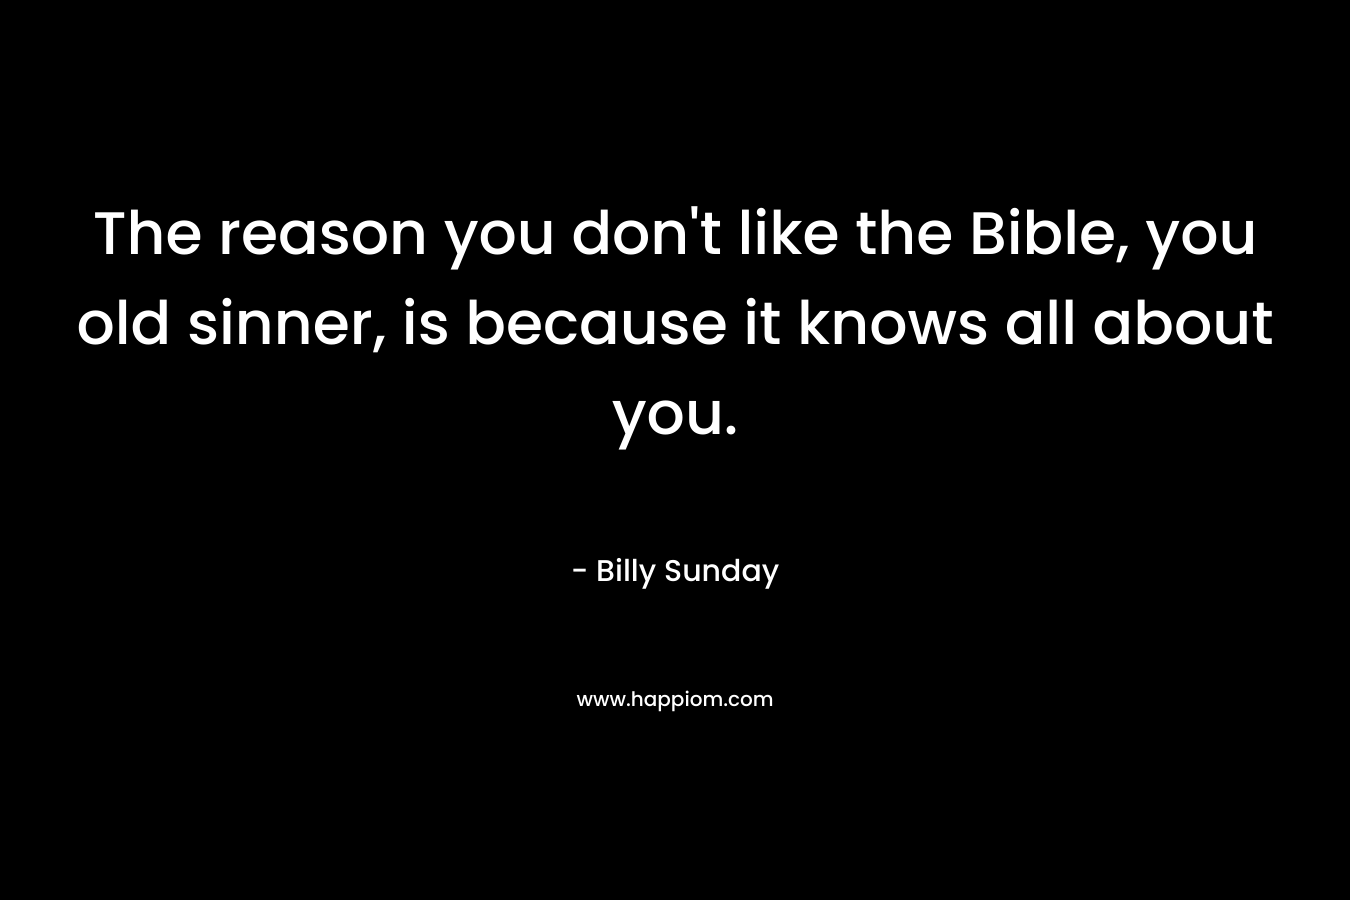 The reason you don't like the Bible, you old sinner, is because it knows all about you.